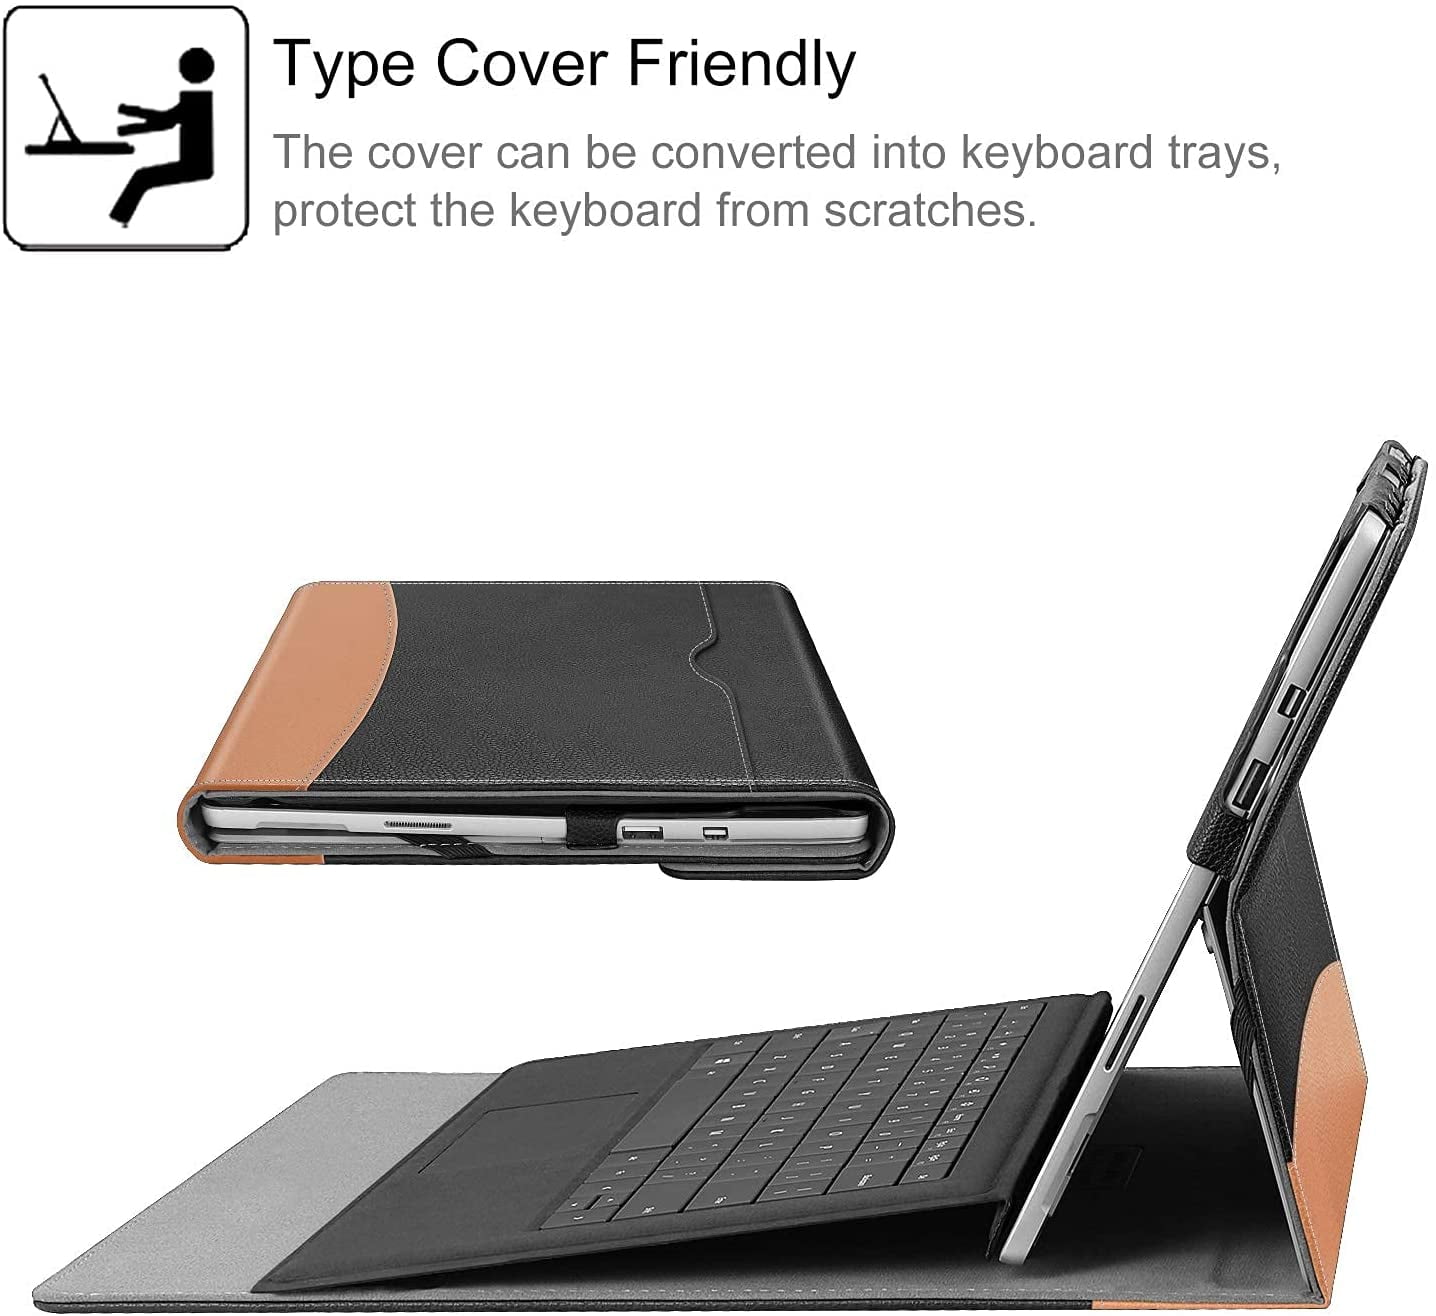 Surface Pro 6 Pro 4 Ice Blue Compatible with Type Cover Keyboard Portfolio Business Cover with Pocket Pro 5 Fintie Case for 12.3 Inch Microsoft Surface Pro 7 Plus Surface Pro 7 Pro 3